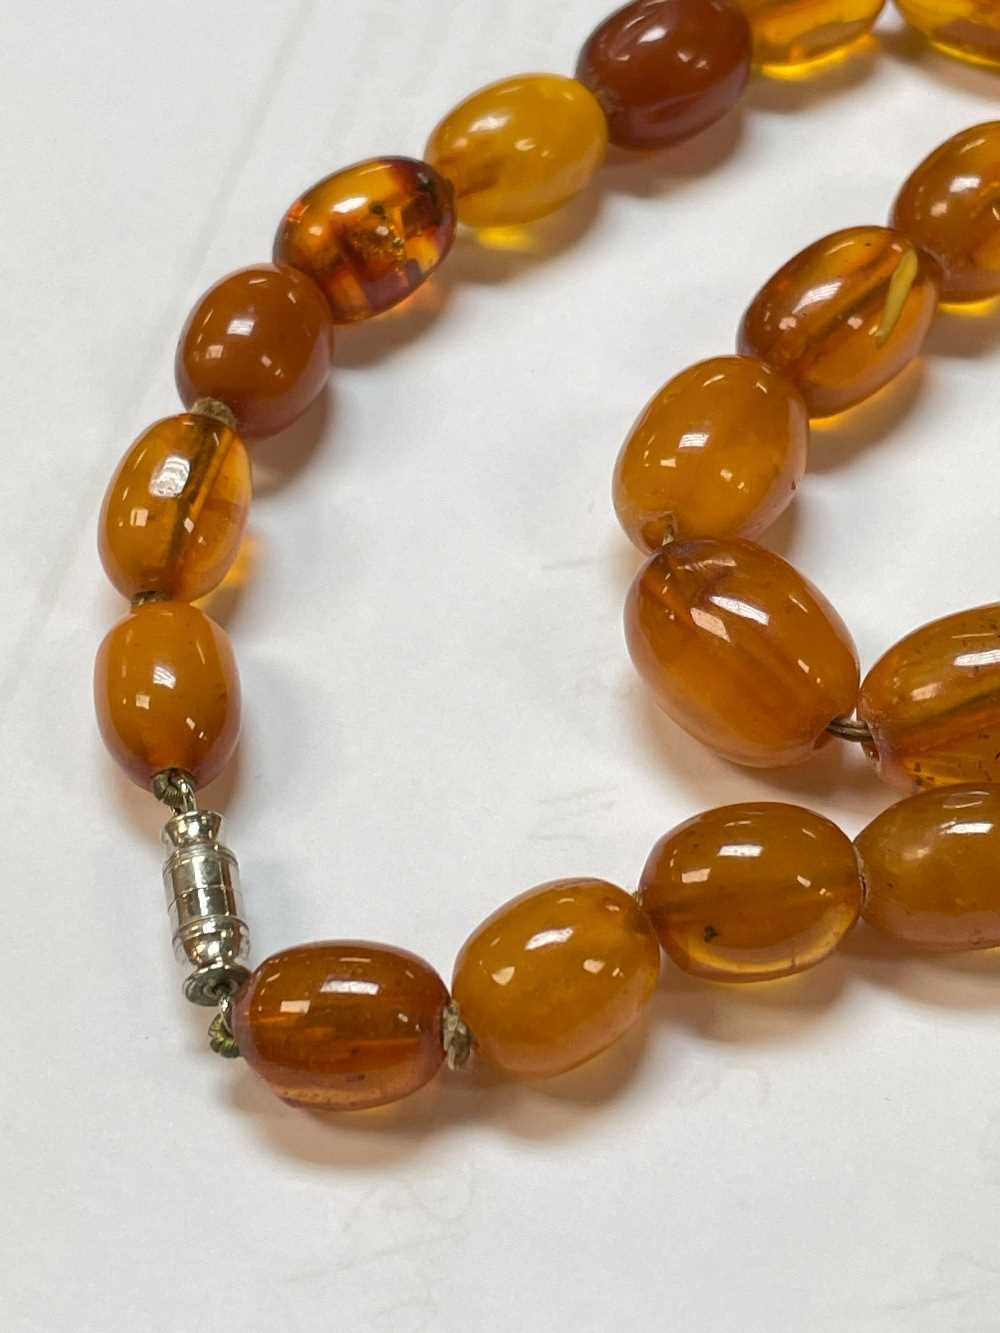 SINGLE STRAND AMBER BEAD NECKLACE, beads 13mm to 20mm, approx gross wt. 55gms - Image 8 of 13